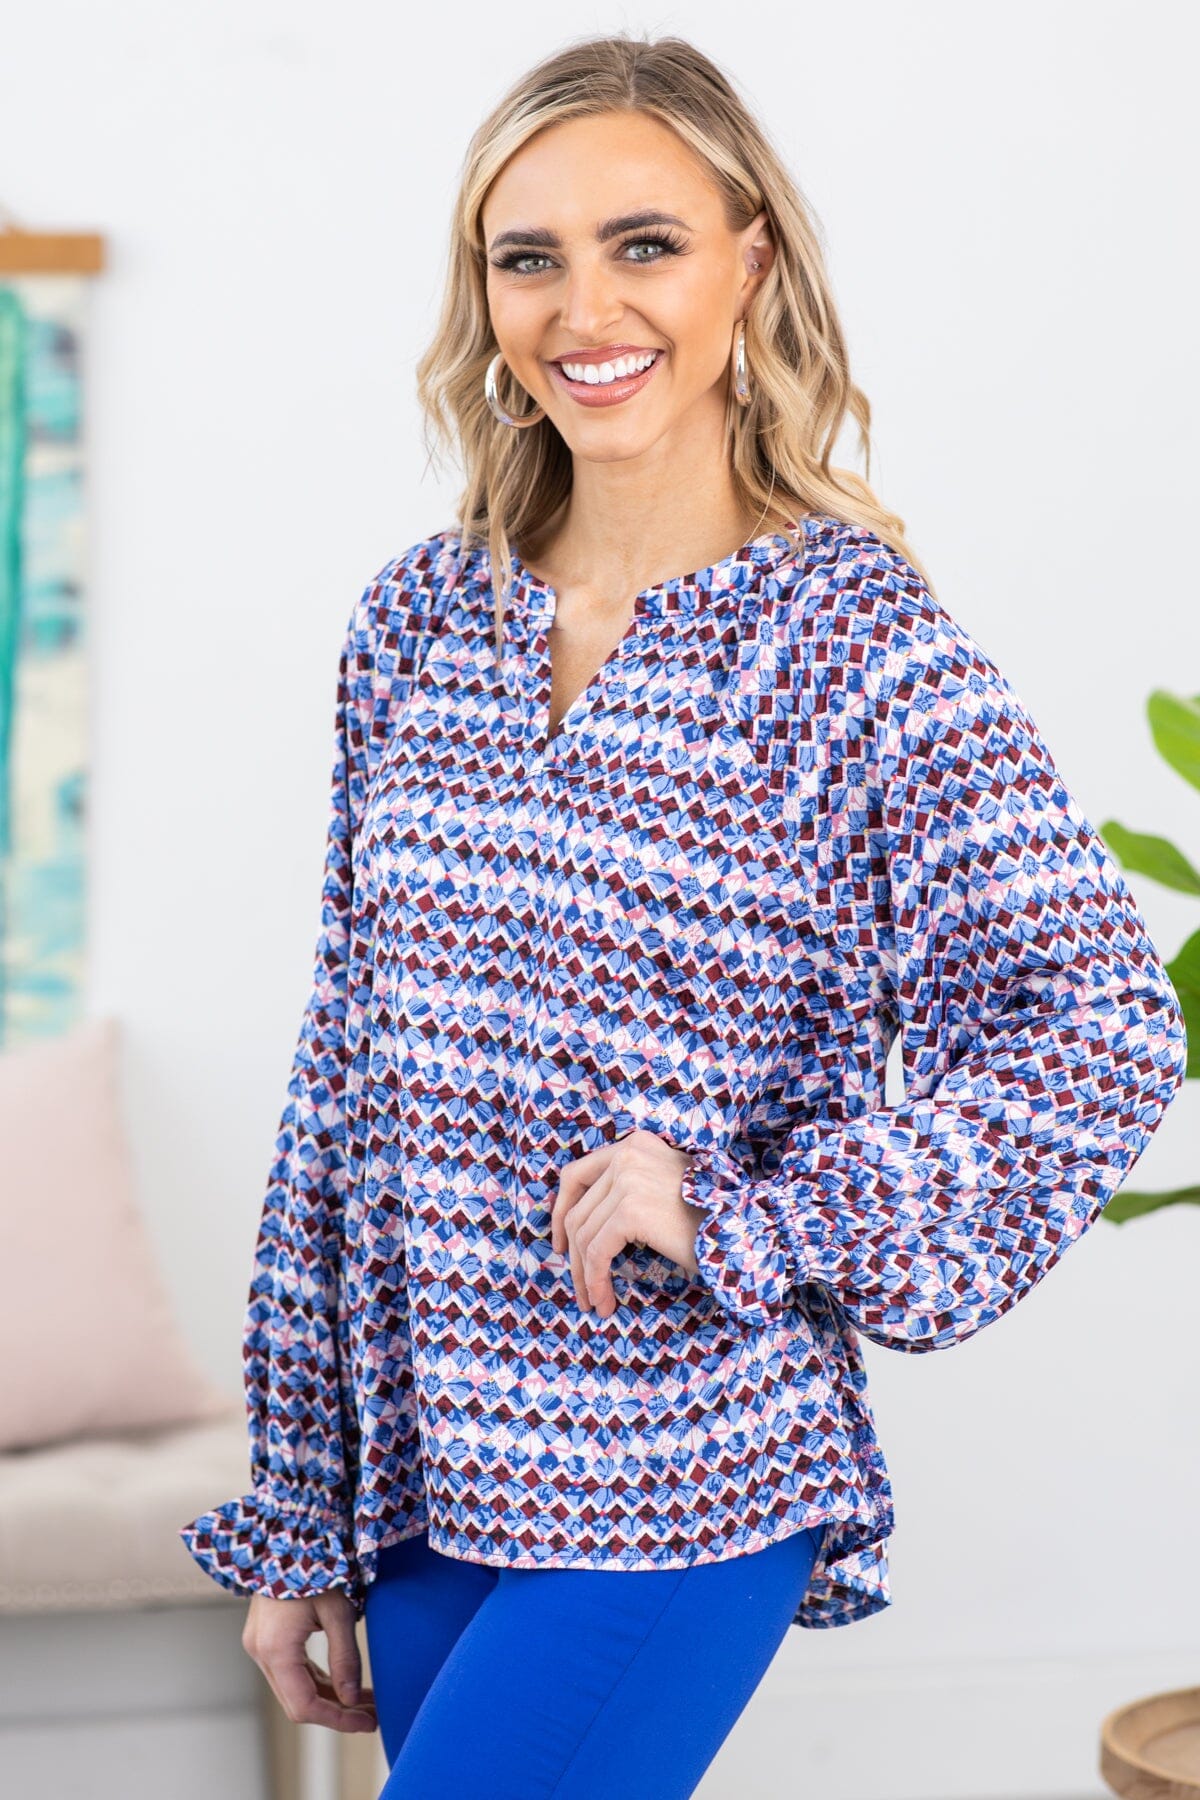 Blue and Berry Geometric Print Notch Neck Top - Filly Flair